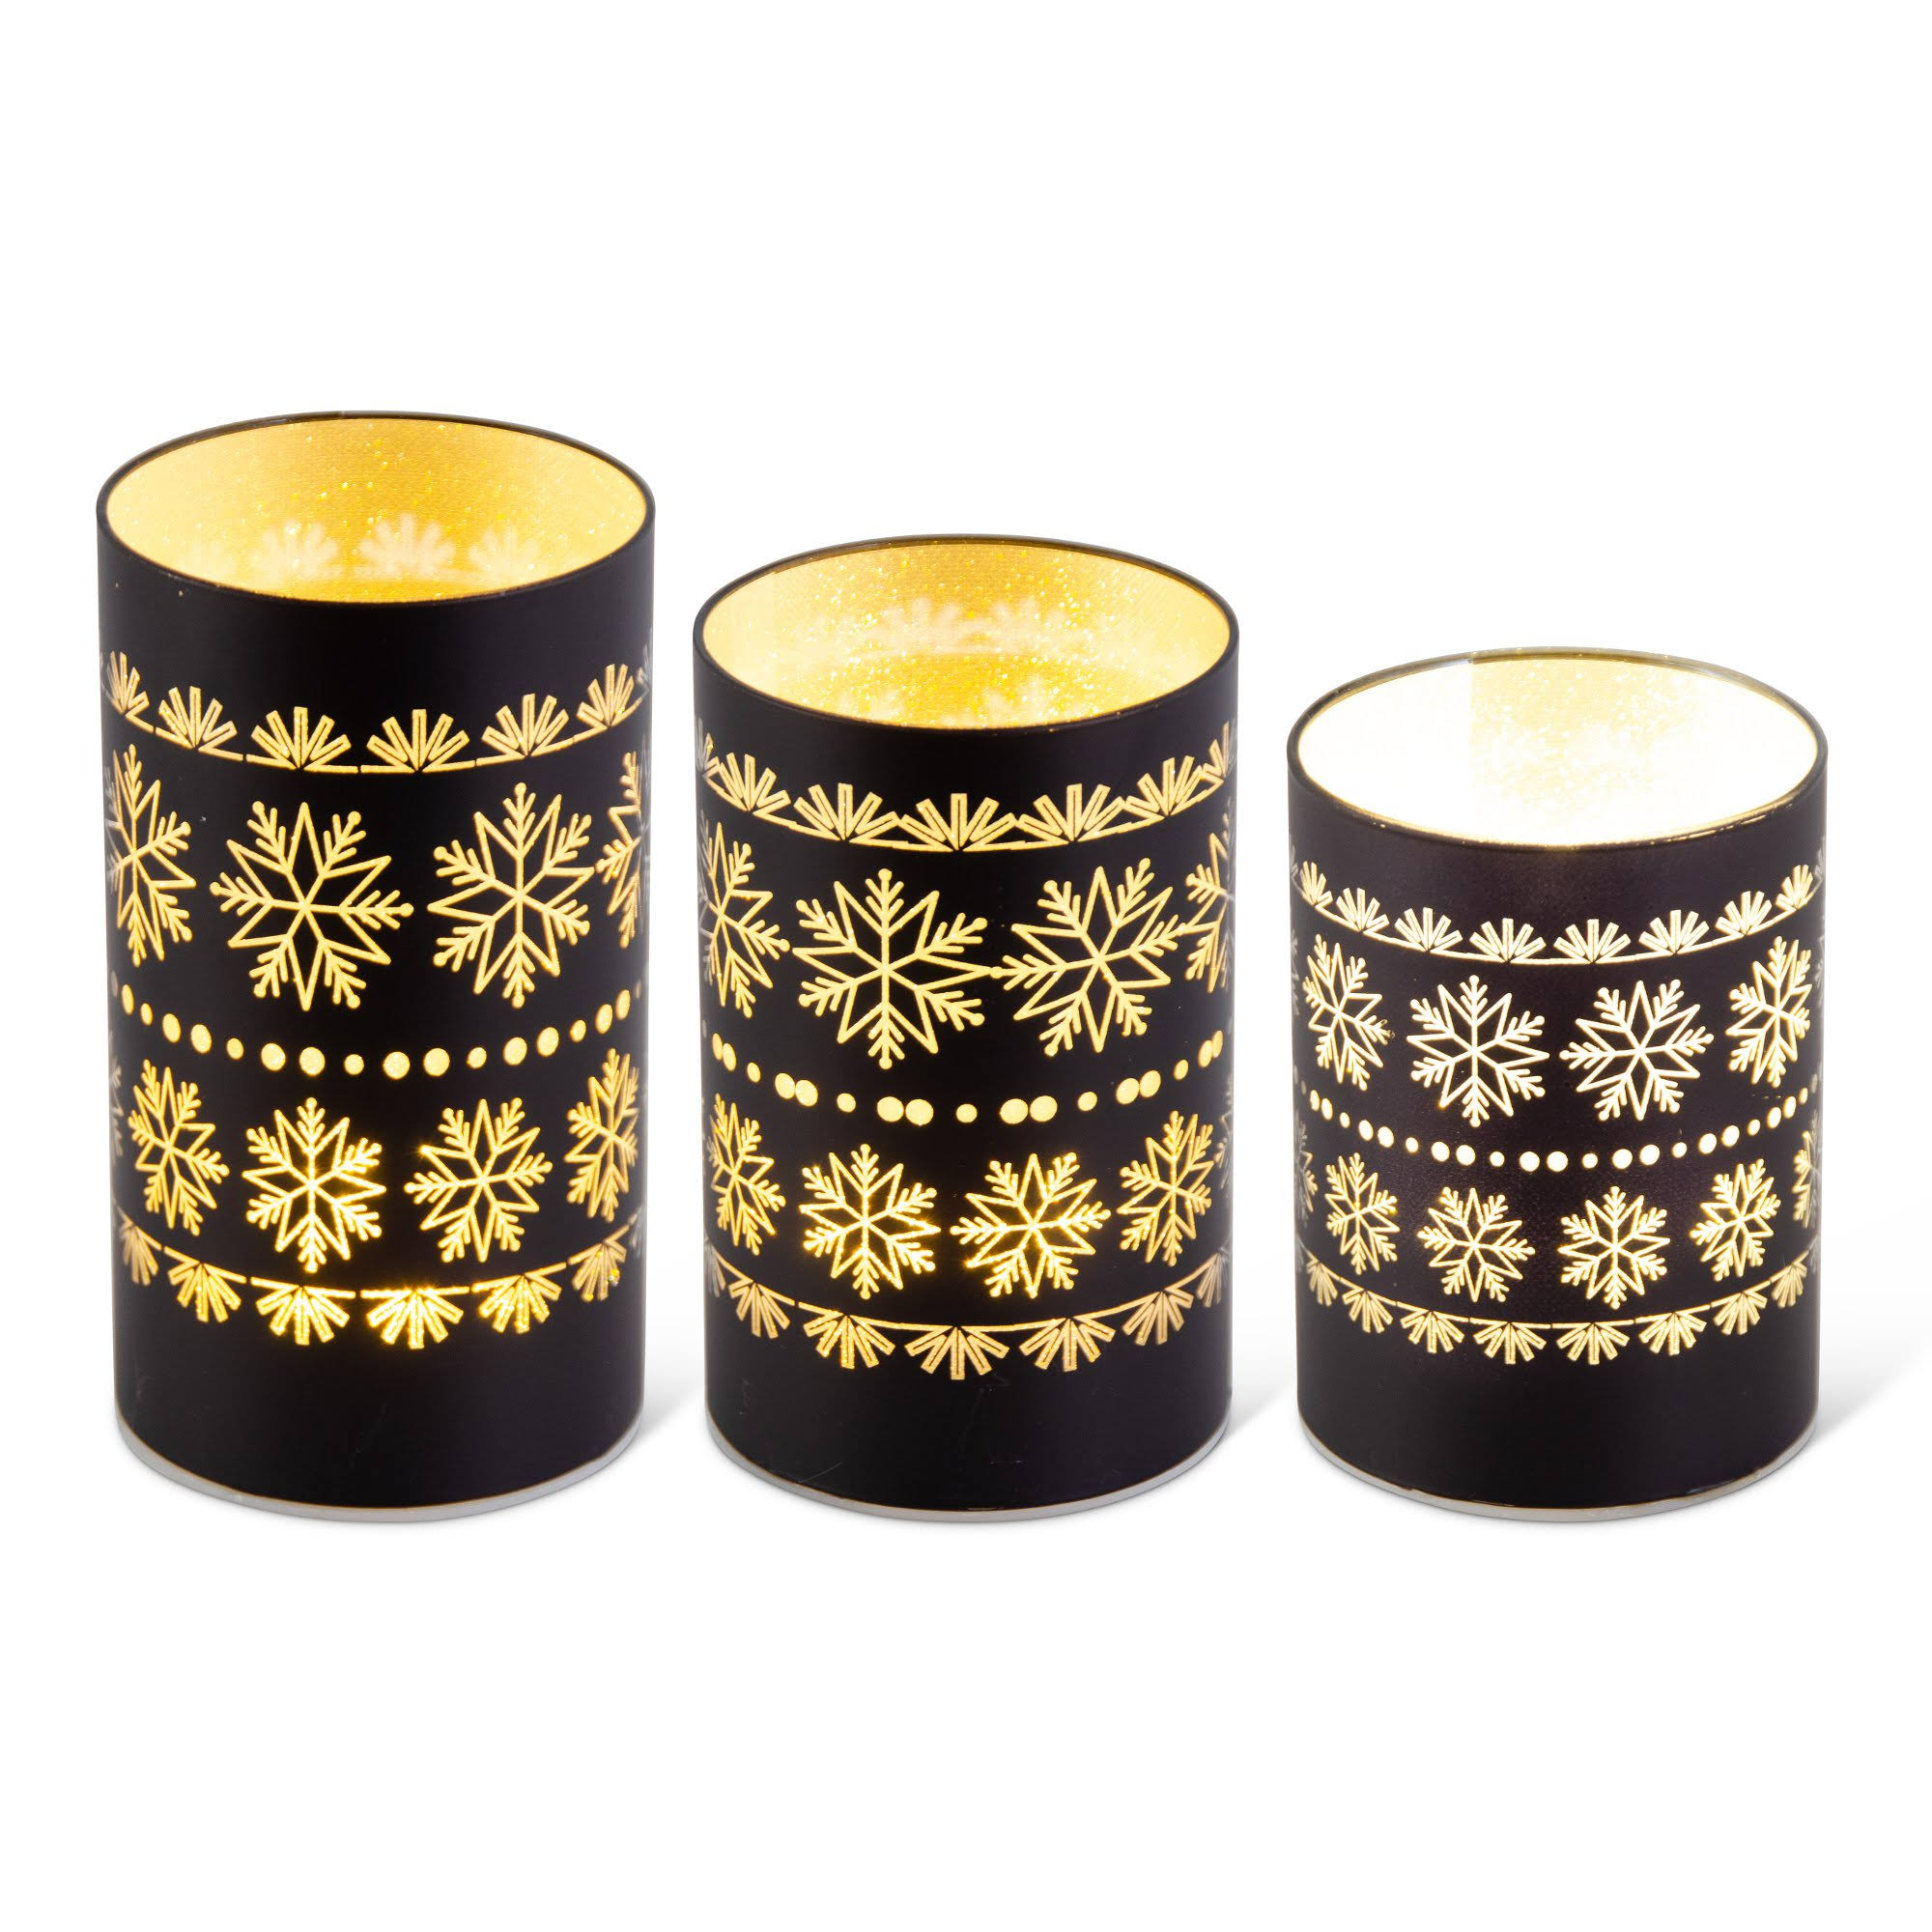 5 inch Black LED Glass Candle Holder with Snowflakes